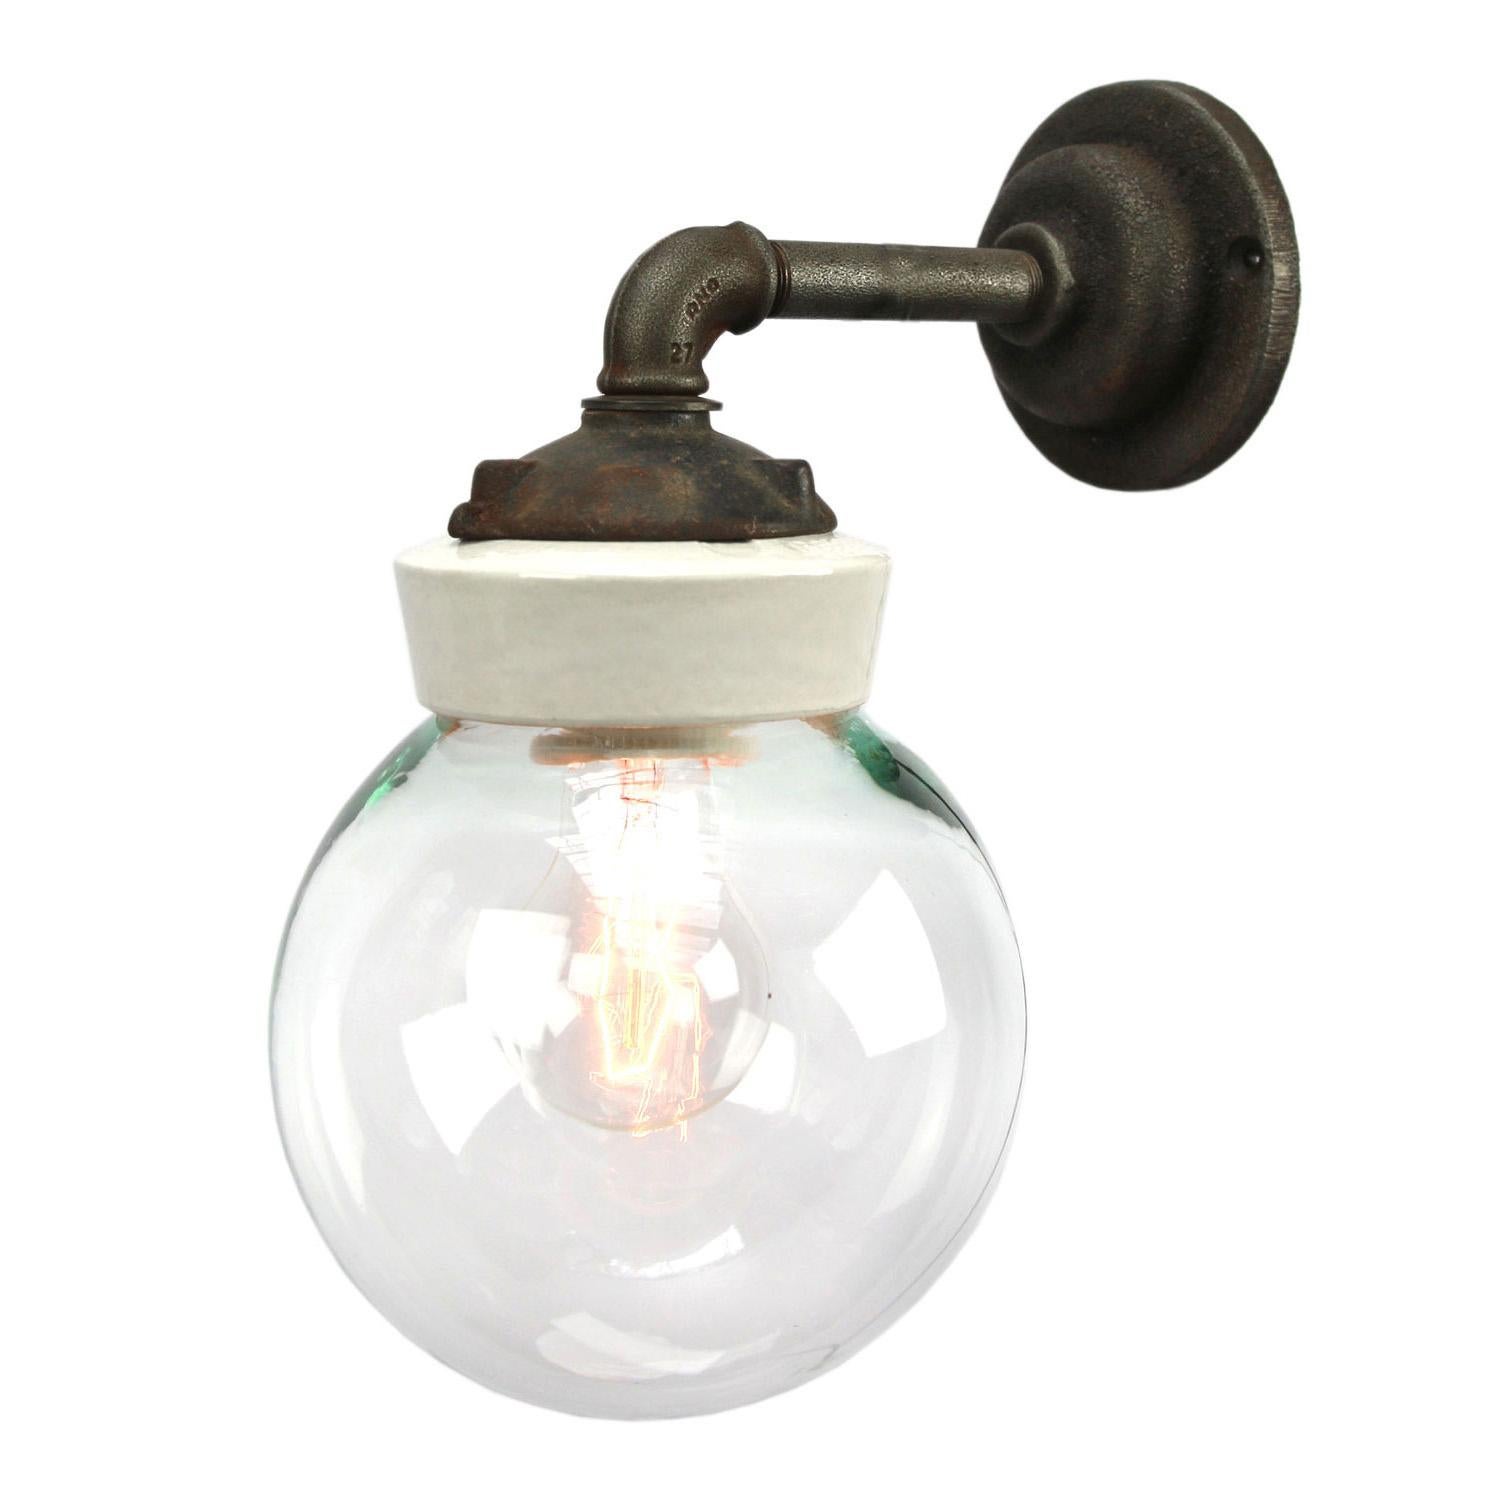 Porcelain Industrial wall lamp.
White porcelain, cast iron and clear glass.
2 conductors, no ground.

Diameter wall mount: 10.5 cm / 4”. 2 holes to secure.

For use inside only

Weight: 2.05 kg / 4.5 lb

Priced per individual item. All lamps have